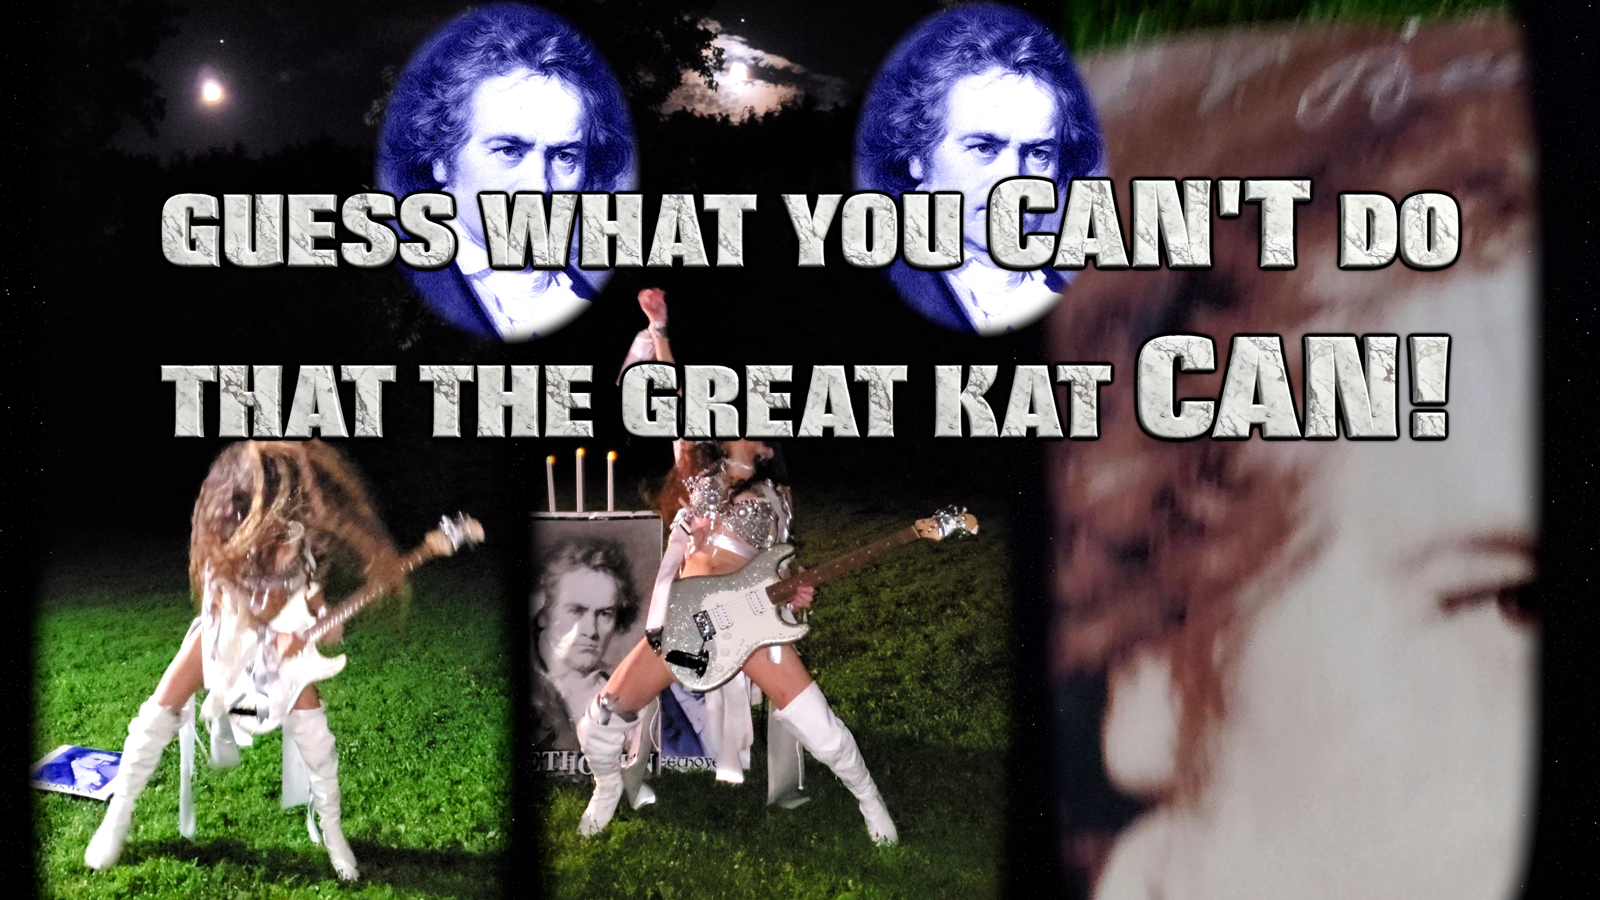 The Great Kat's "GUESS WHAT YOU CAN'T DO THAT THE GREAT KAT CAN"